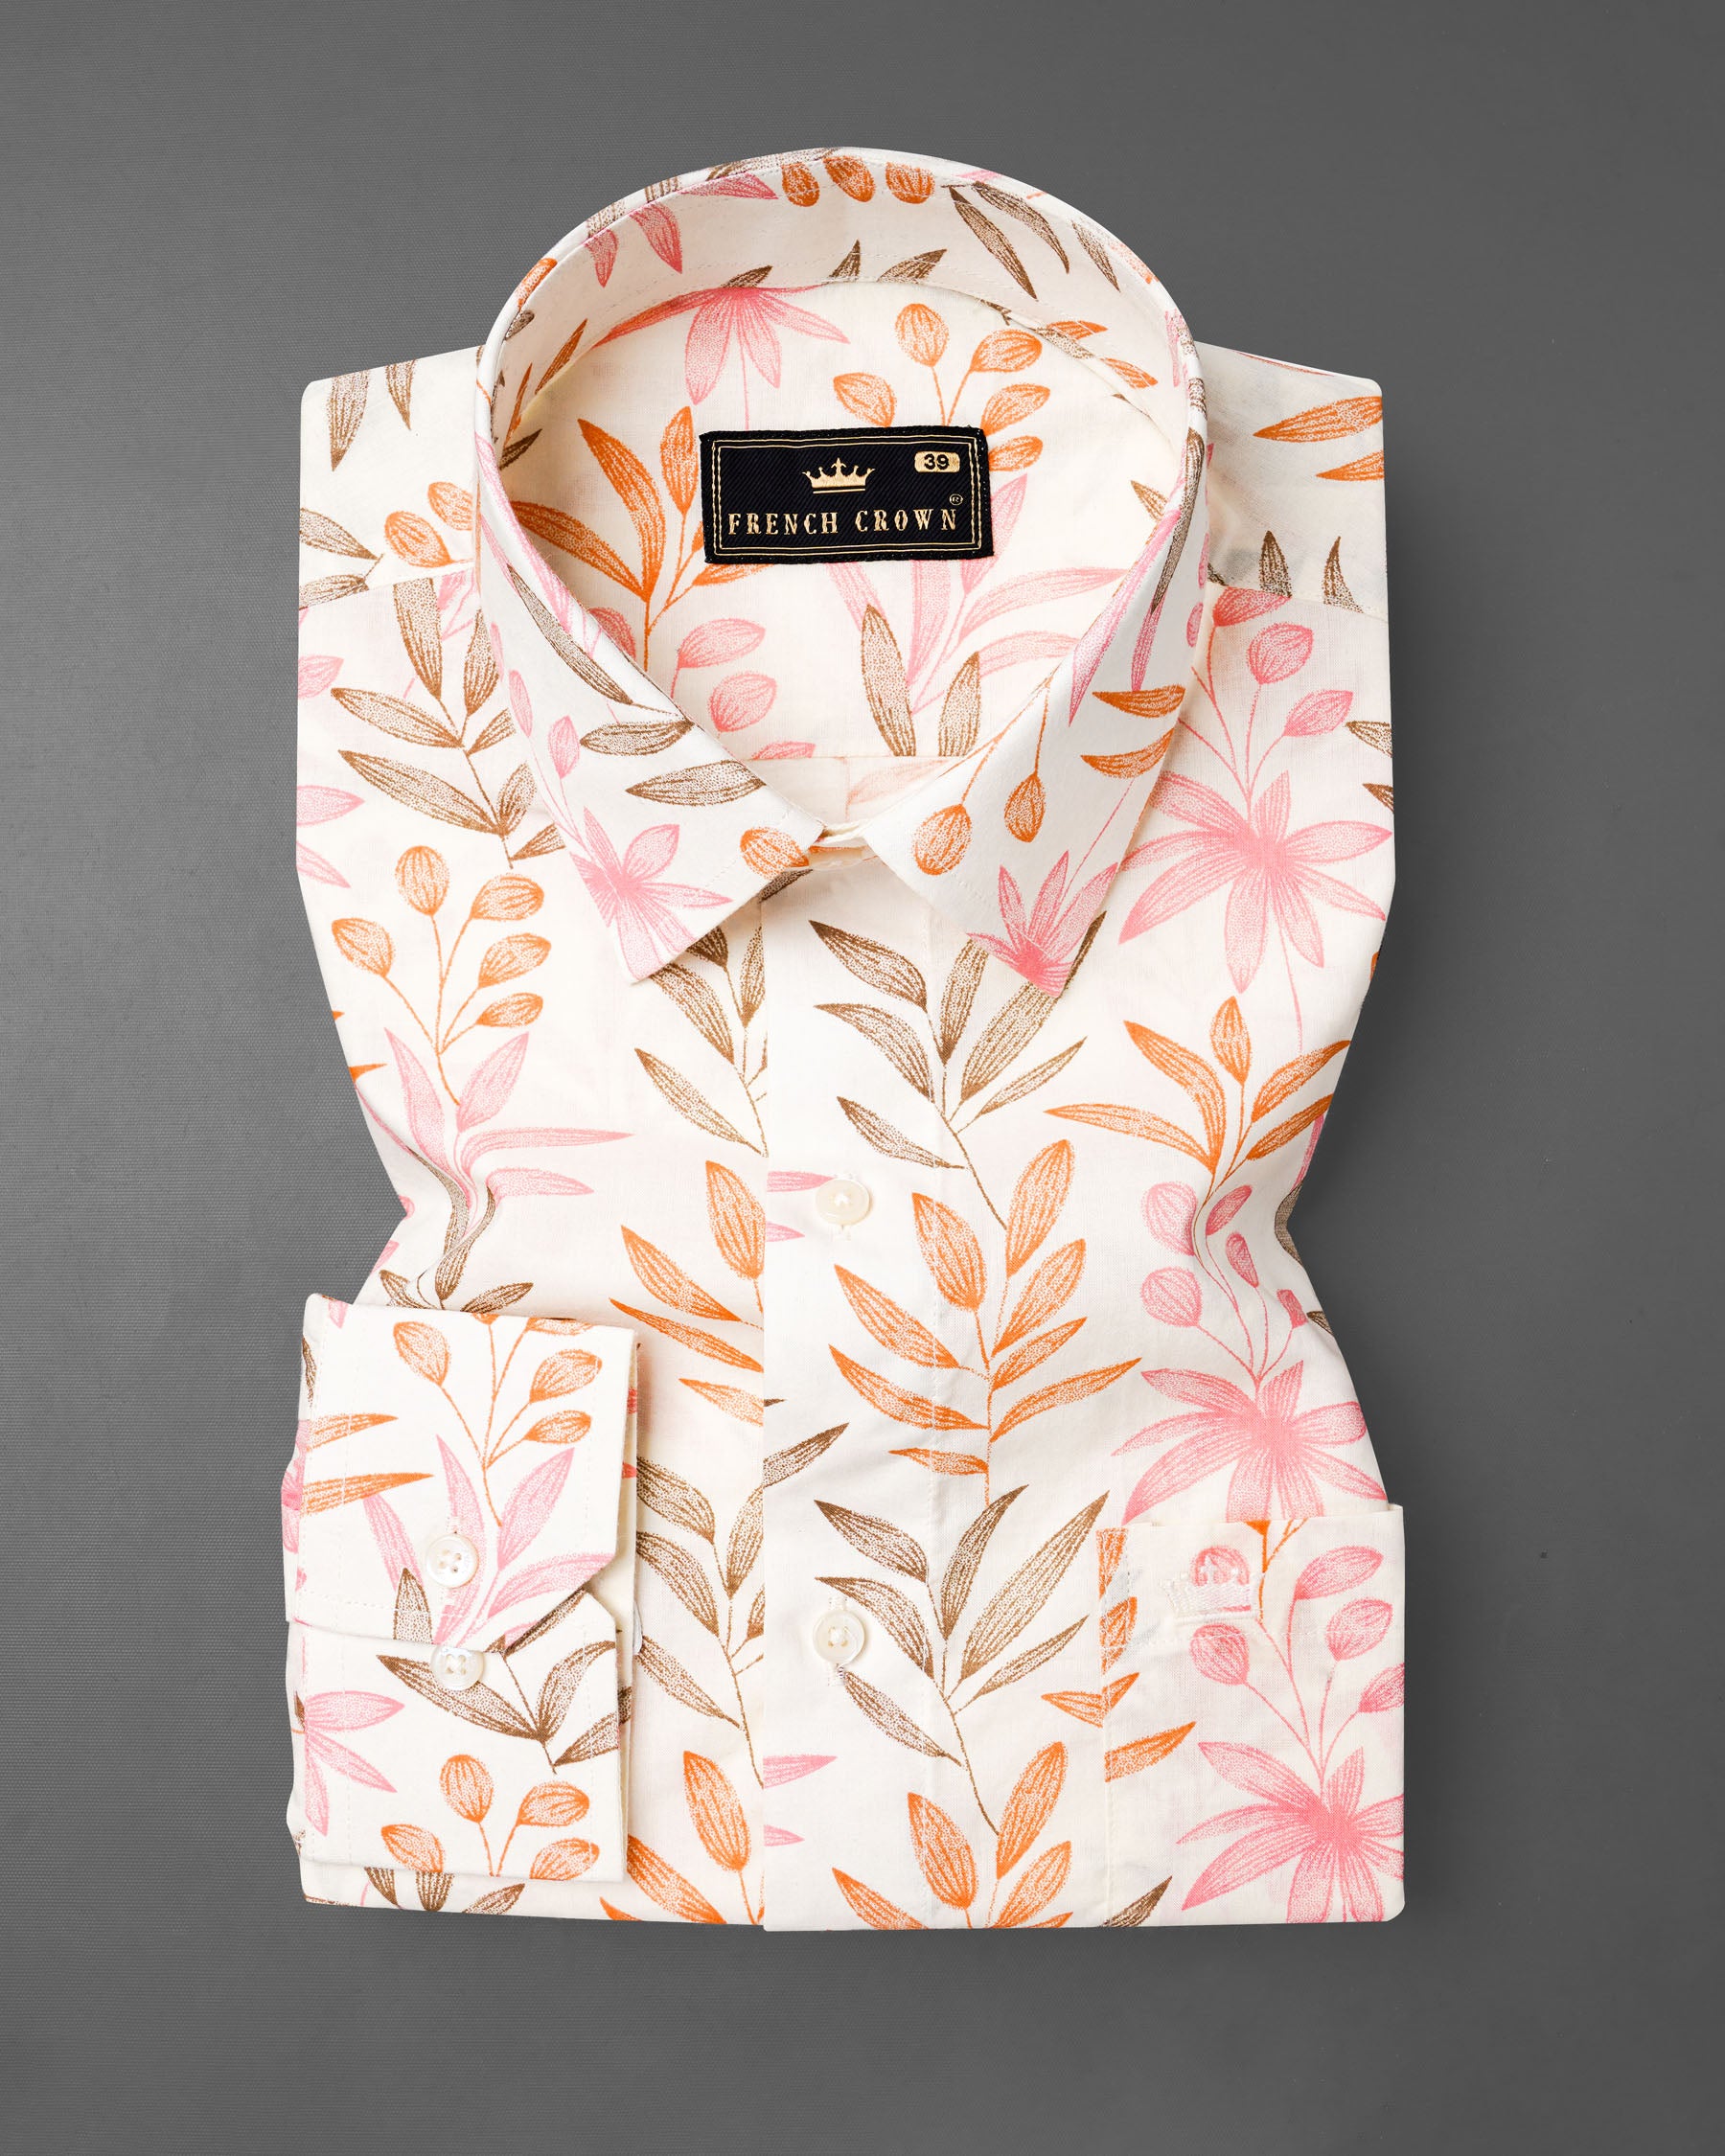 Bright White With Multi Coloured Leaves Printed Premium Cotton Shirt 7729-38,7729-38,7729-39,7729-39,7729-40,7729-40,7729-42,7729-42,7729-44,7729-44,7729-46,7729-46,7729-48,7729-48,7729-50,7729-50,7729-52,7729-52